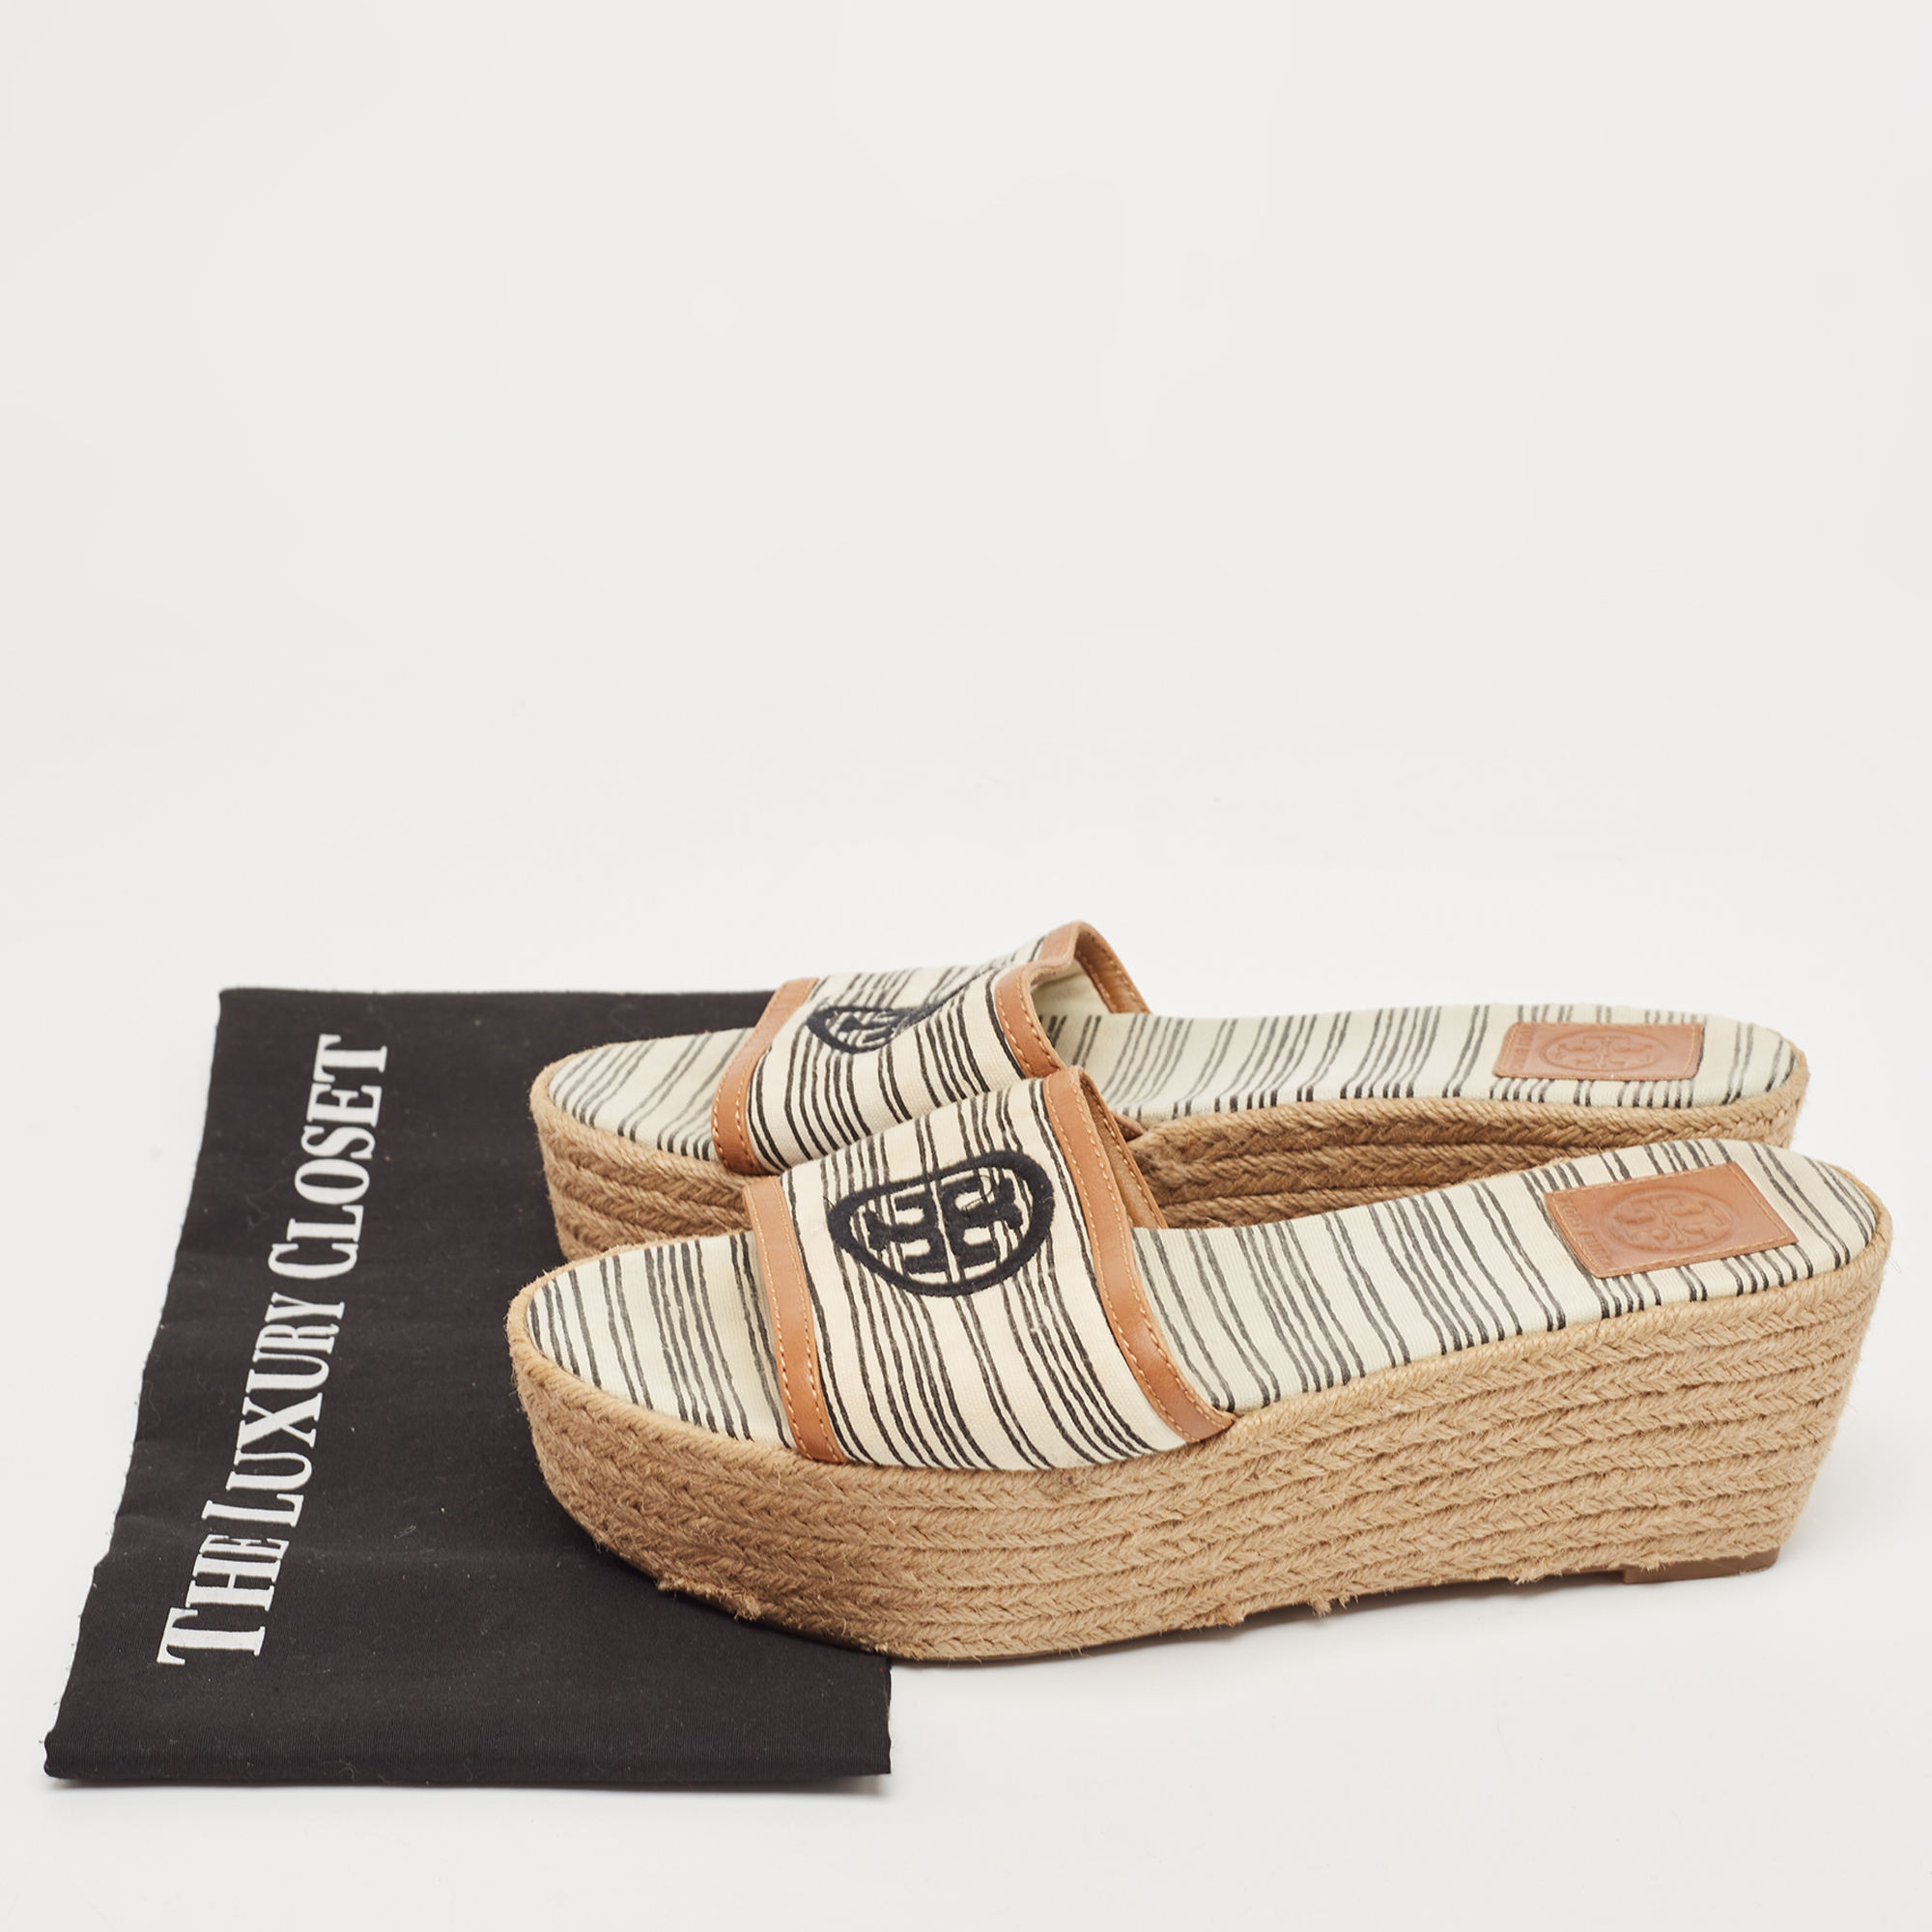 Tory Burch White/Brown Canvas And Leather Espadrille Platform Wedge Slide Sandals Size 37.5